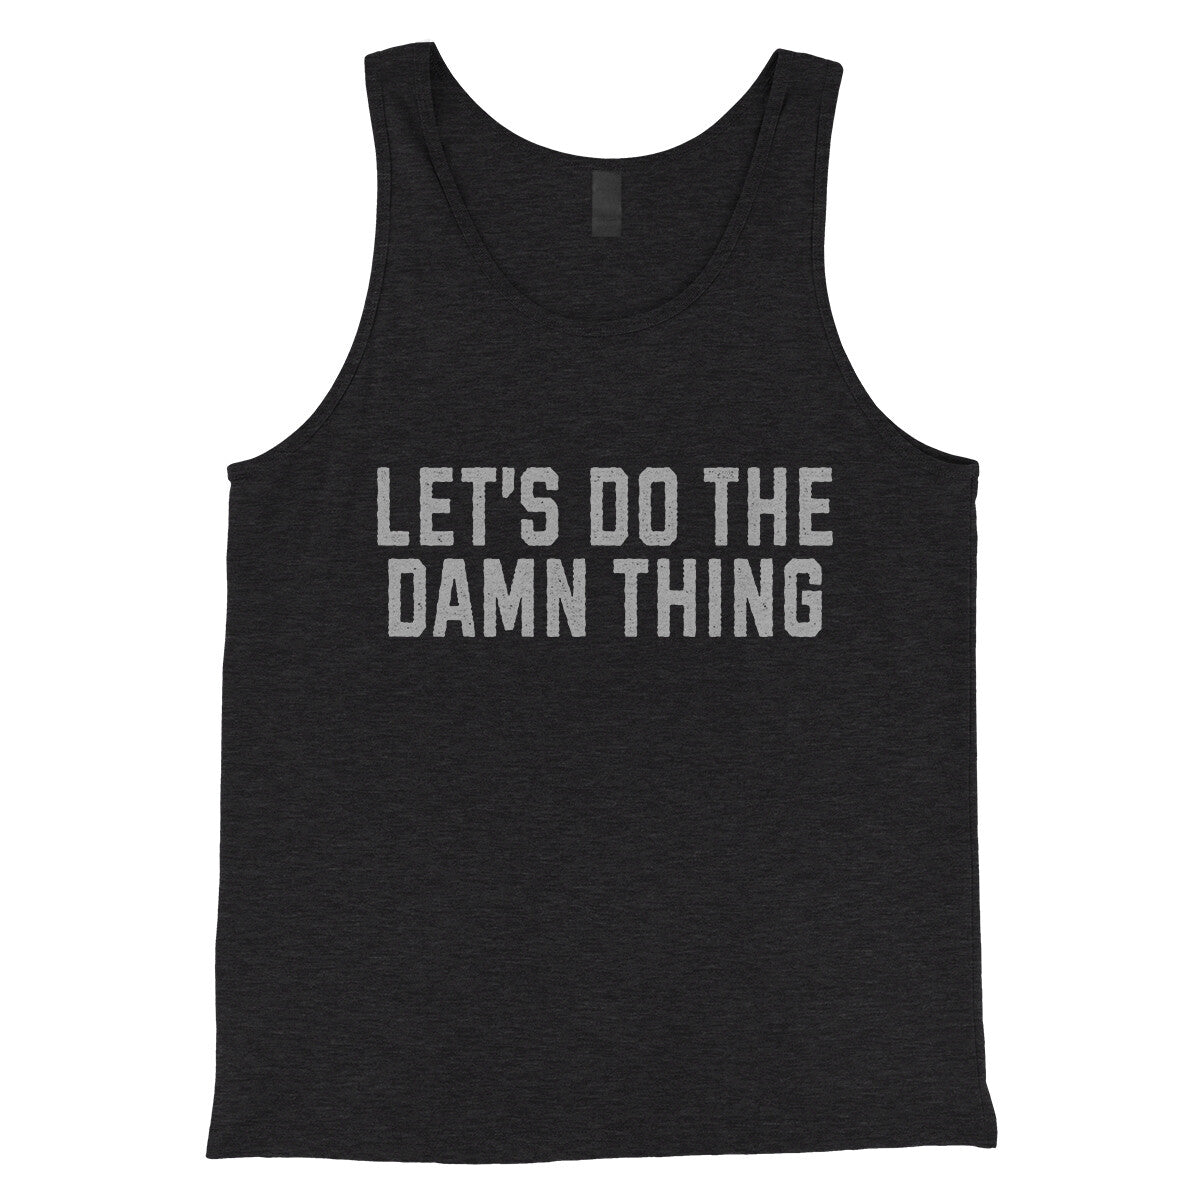 Let’s Do the Damn Thing in Charcoal Black TriBlend Color